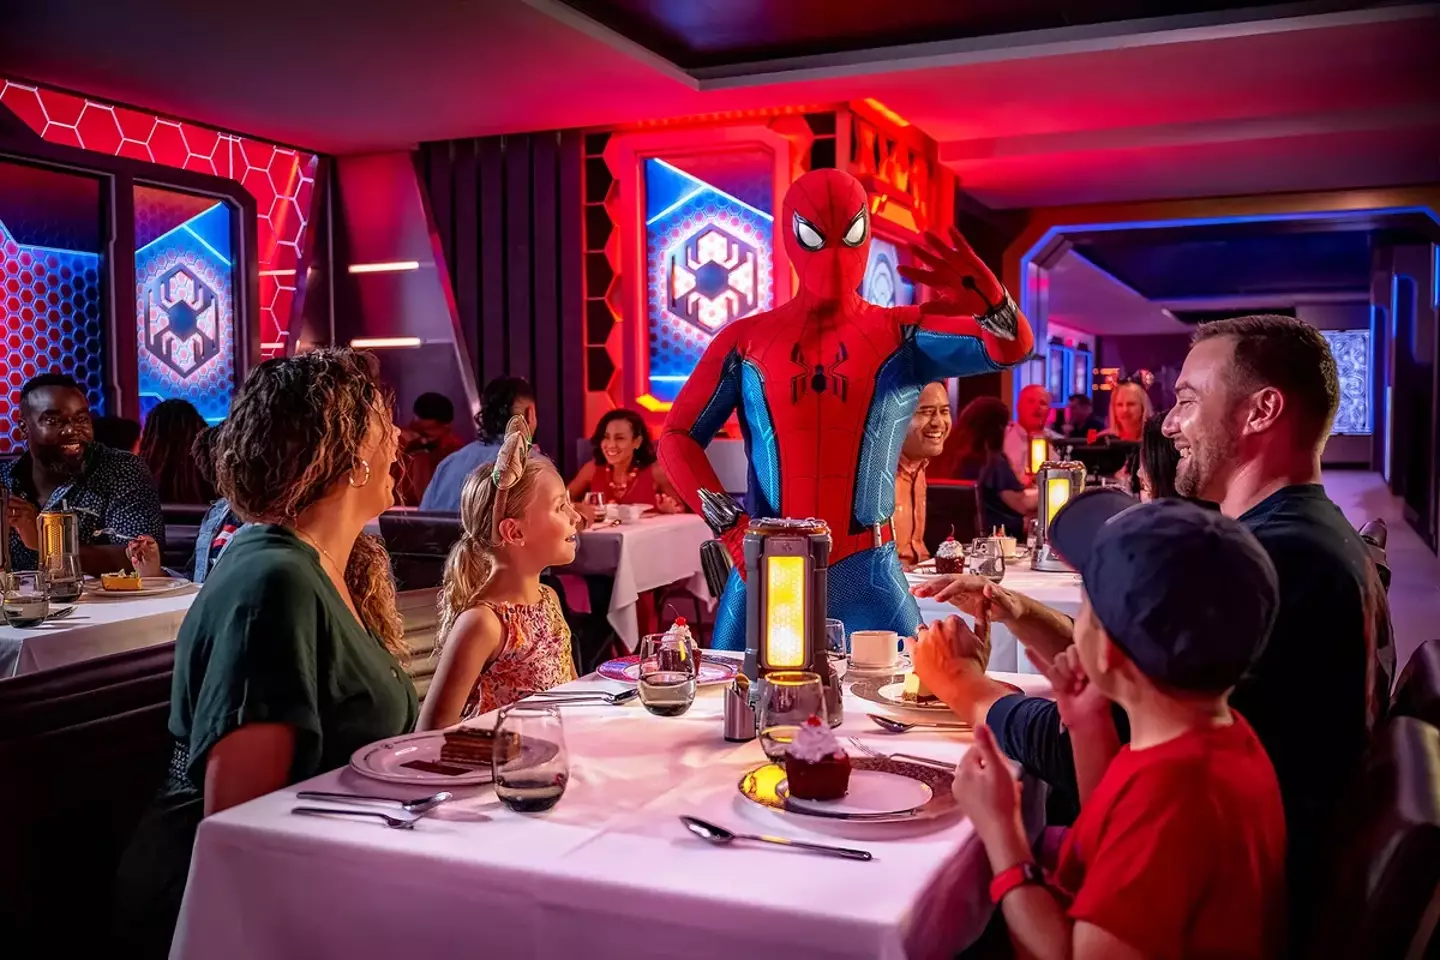 Action heroes can dine alongside Spidey and the Avengers.